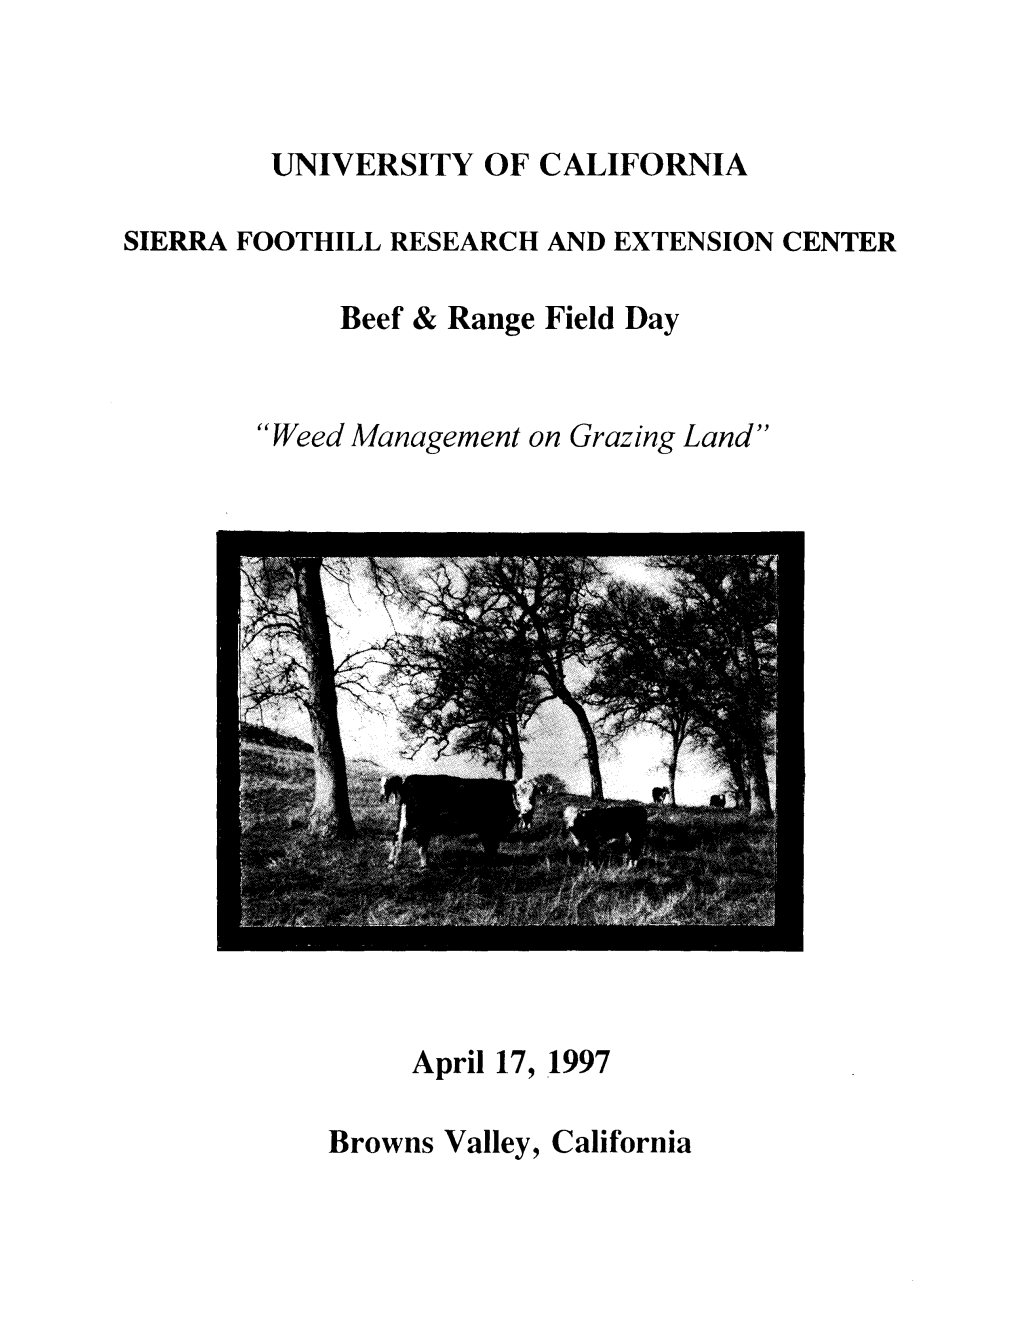 UNIVERSITY of CALIFORNIA Beef & Range Field Day April 17, 1997 Browns Valley, California